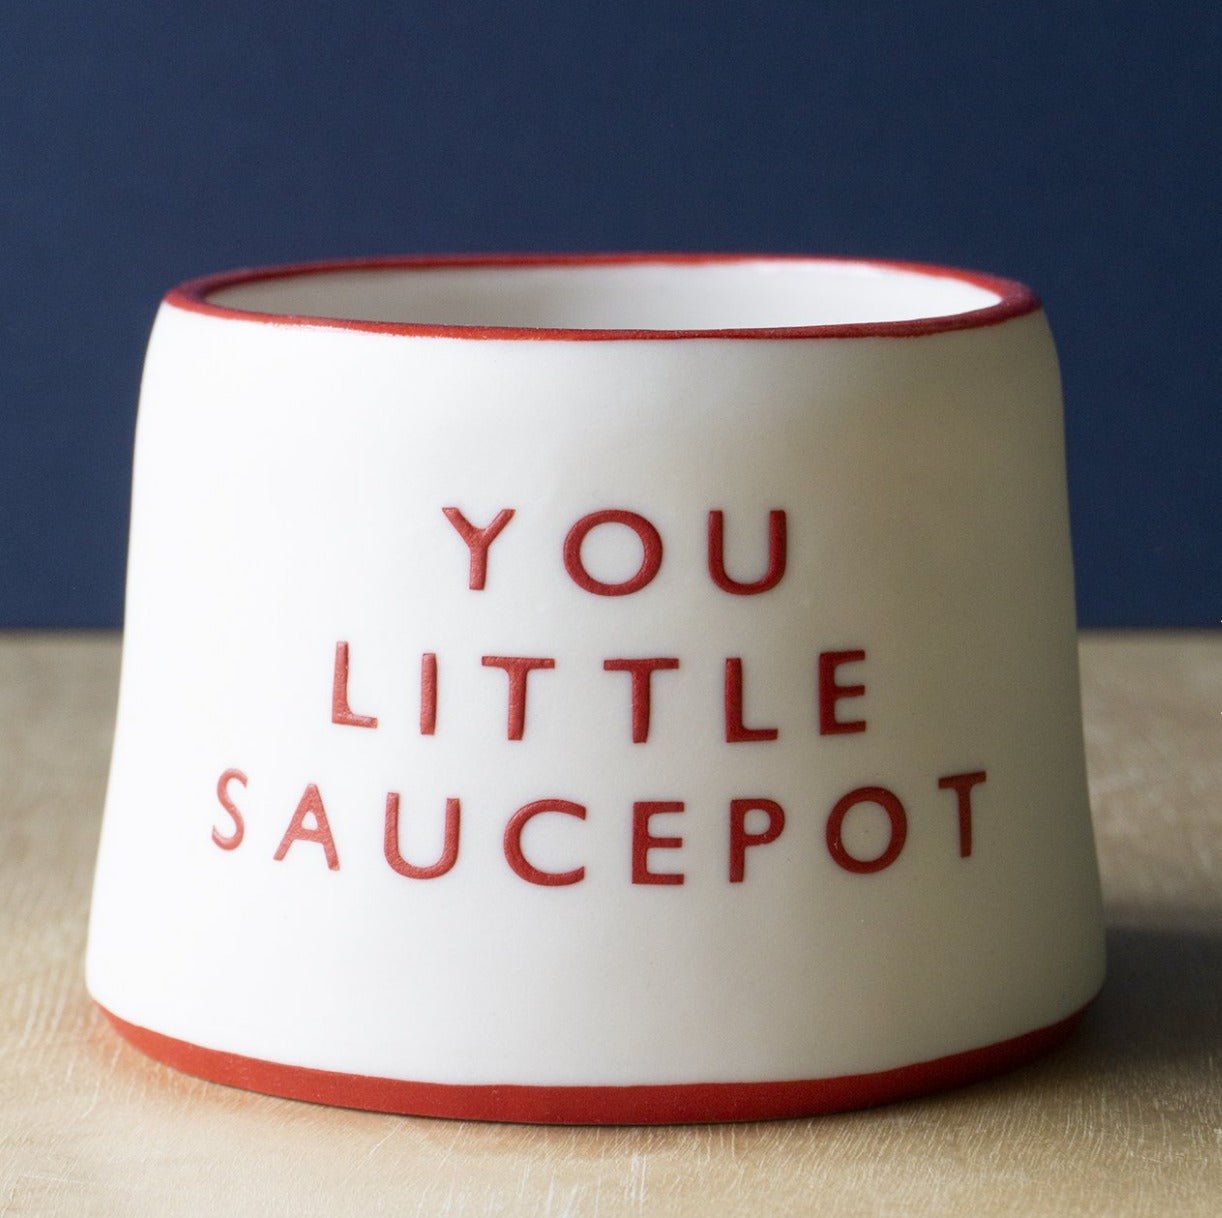 'You Little Saucepot' porcelain container by Word Play Clay - THE BRISTOL ARTISAN